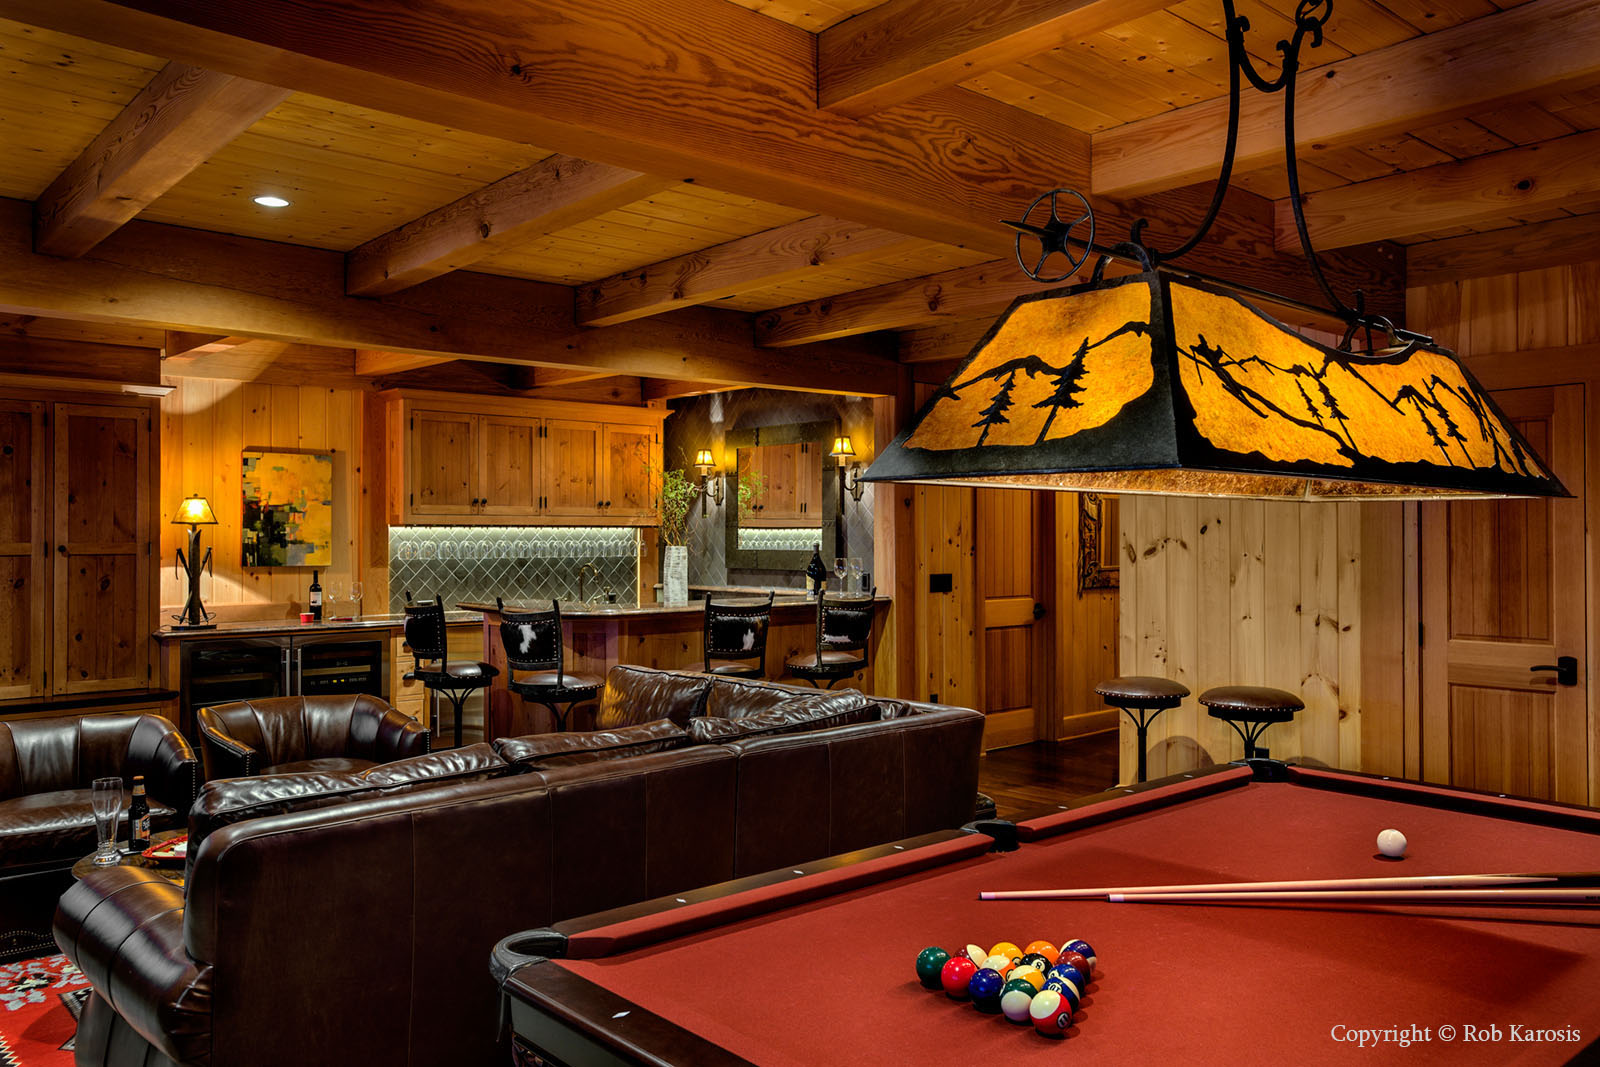 8’ Pool Table and nearby bar area